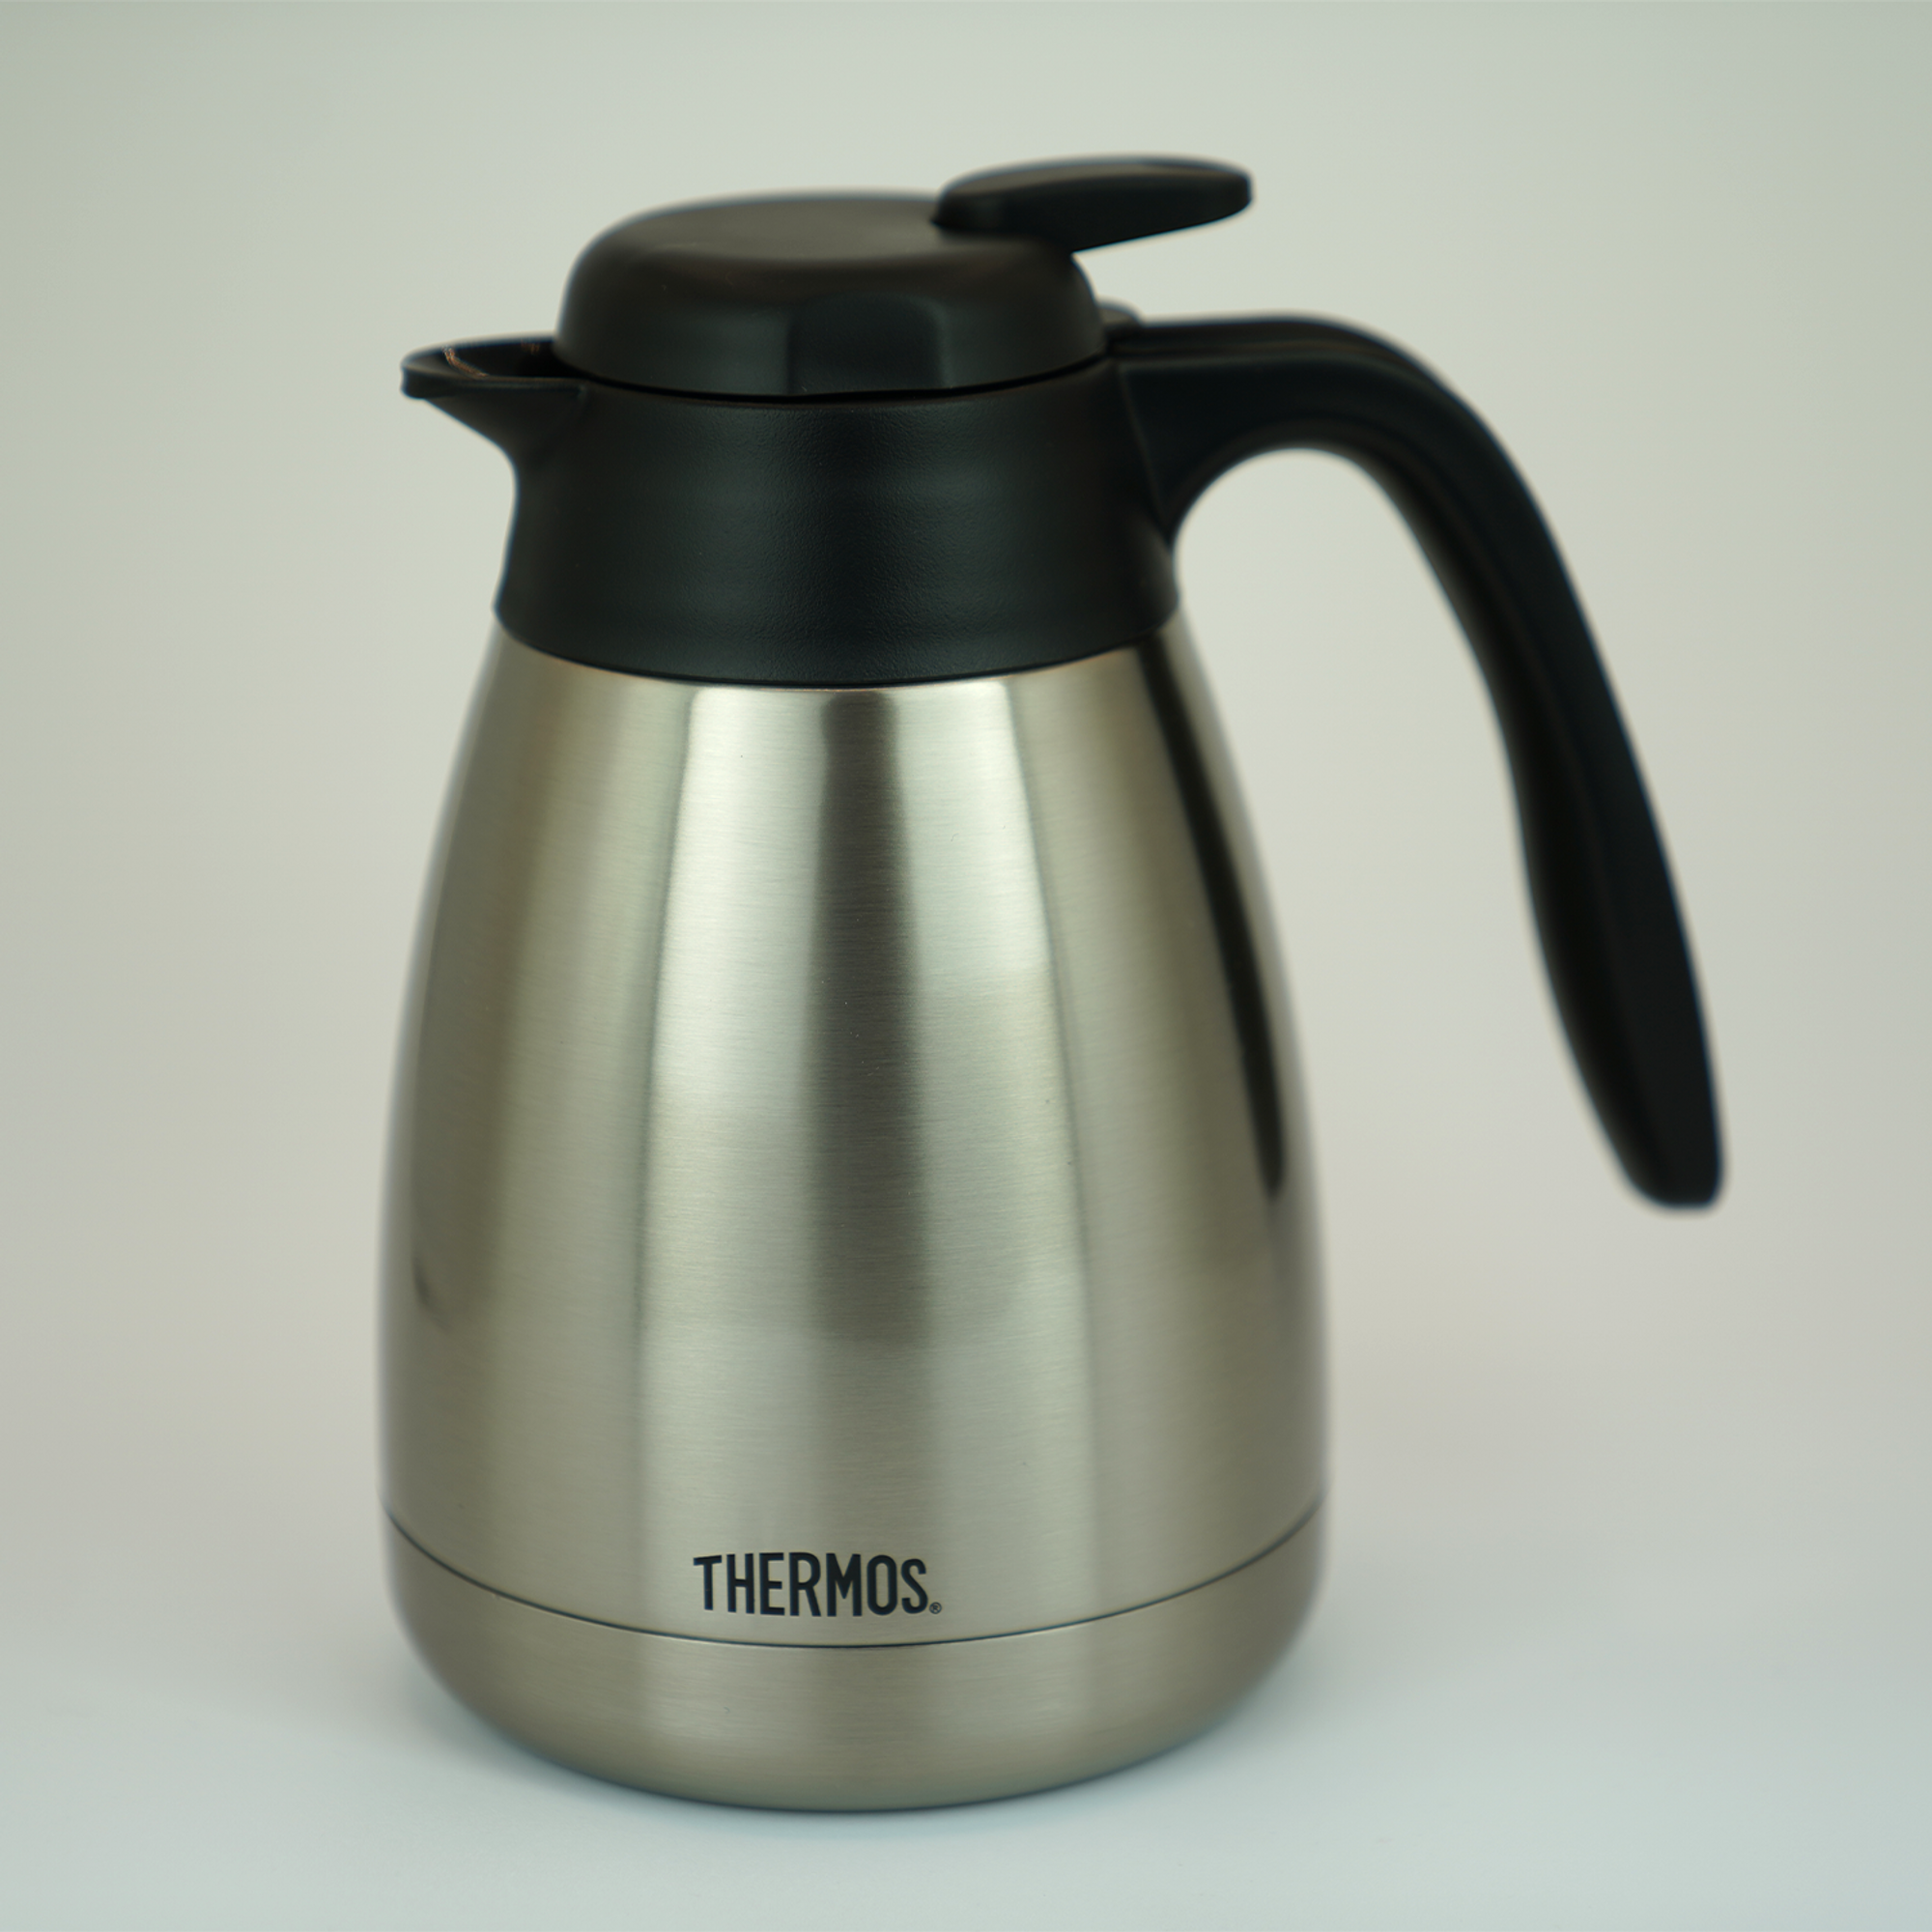 Thermos 1.0L Stainless Steel Carafe